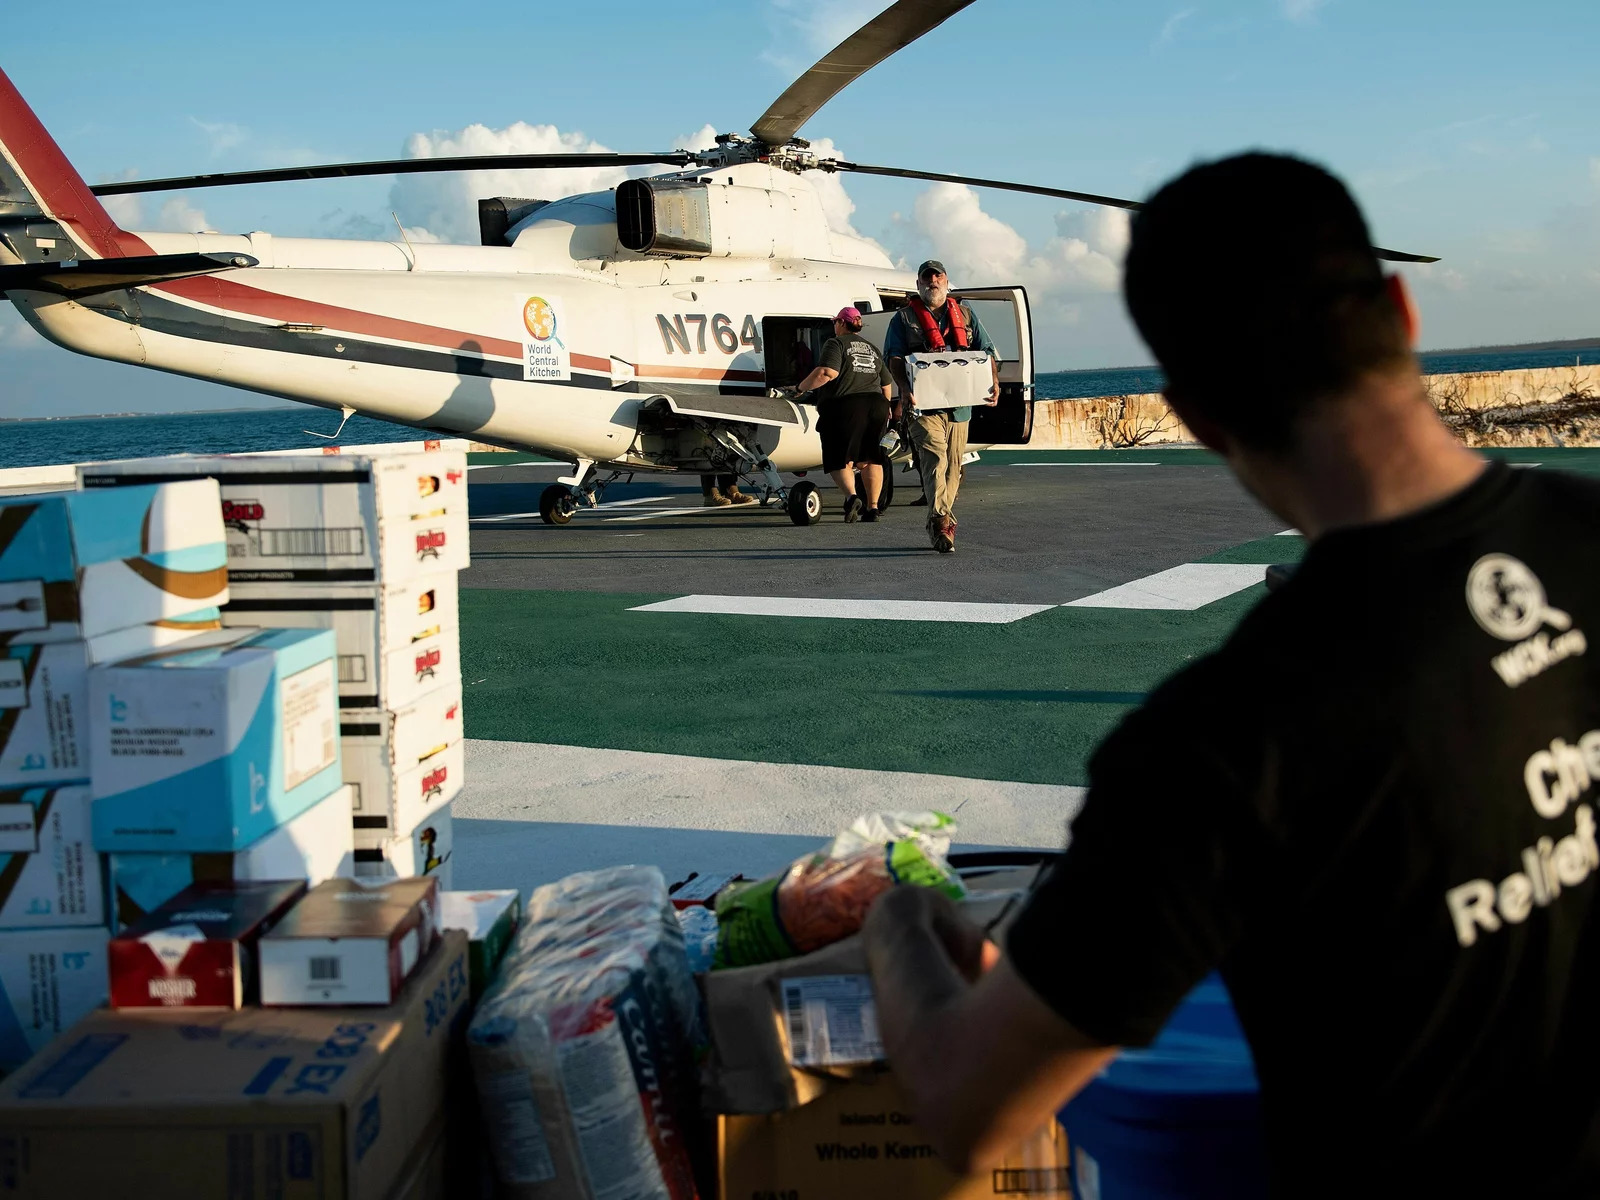 A helicopter full of crates of food being unloaded by workers